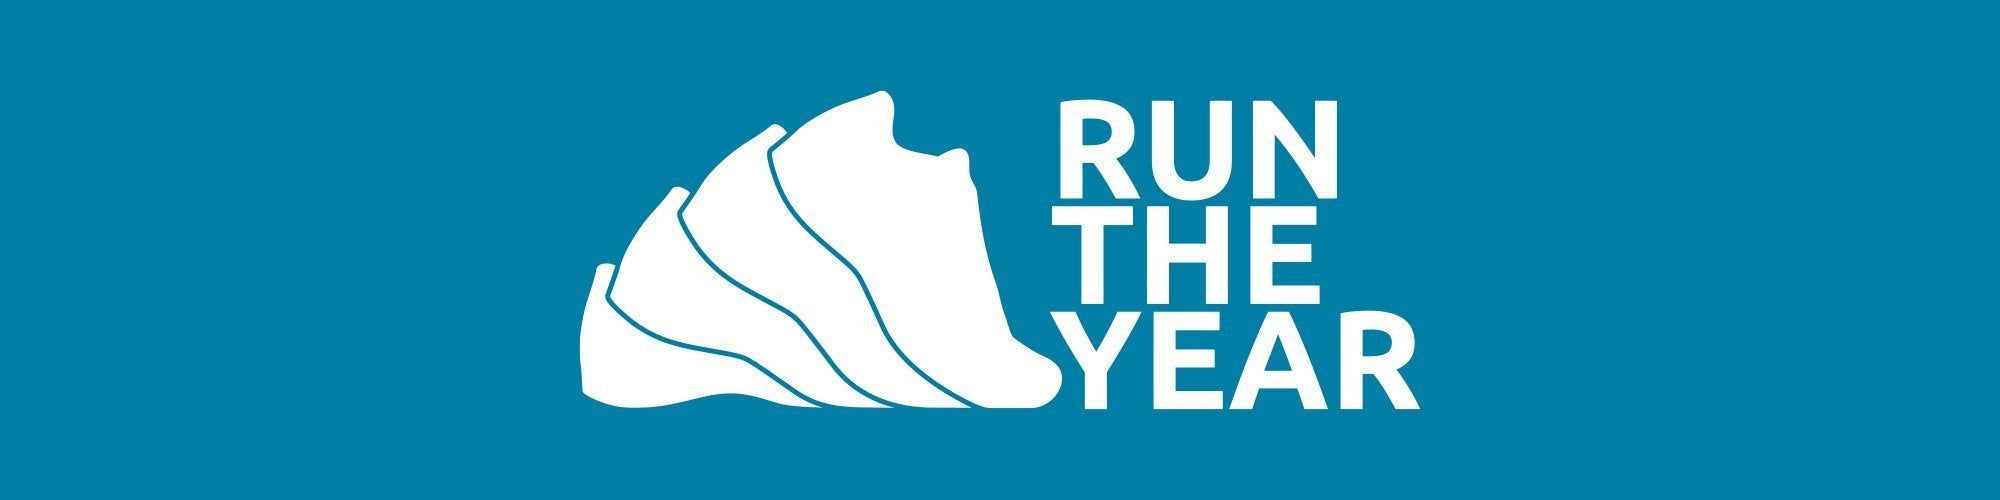 Run The Year - Virtual Fitness Challenge Collection | Run The Edge